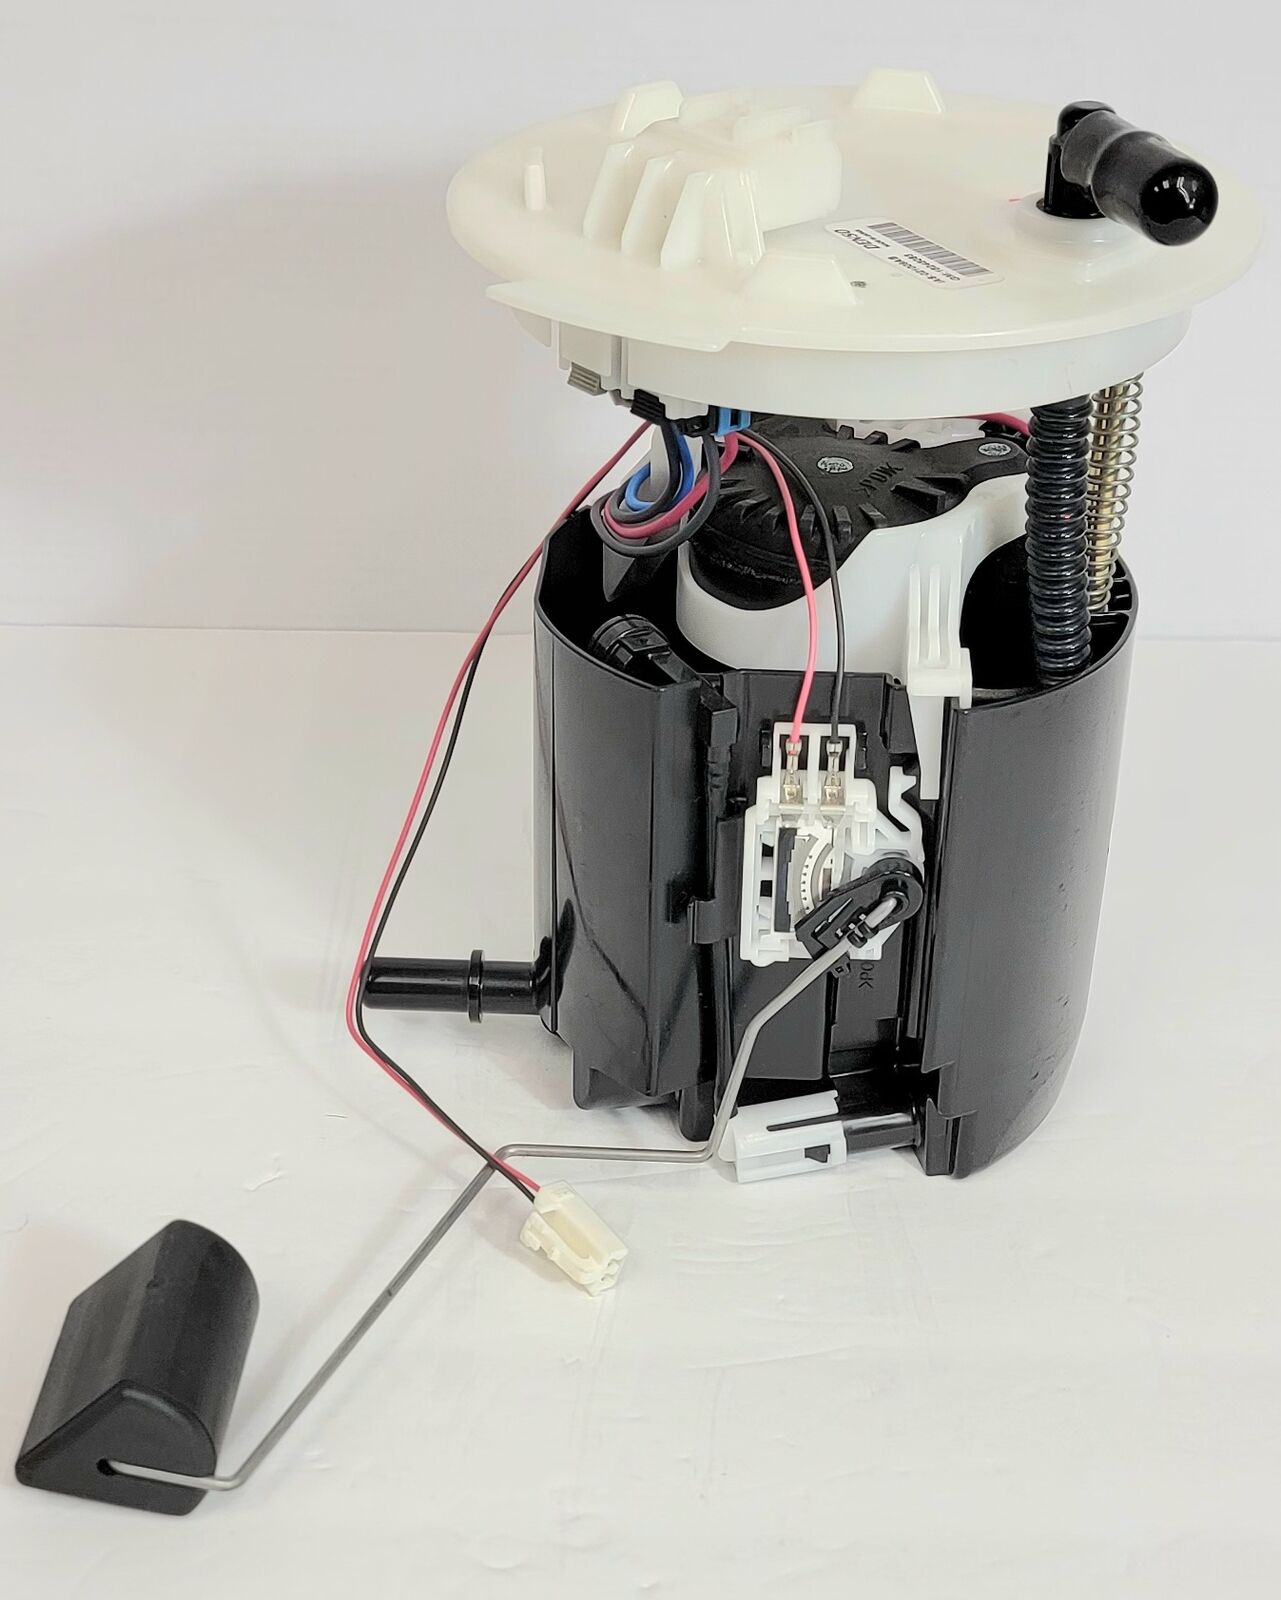 OEM Fuel Pump Module M10235 for Cadillac CTS 2009-2015